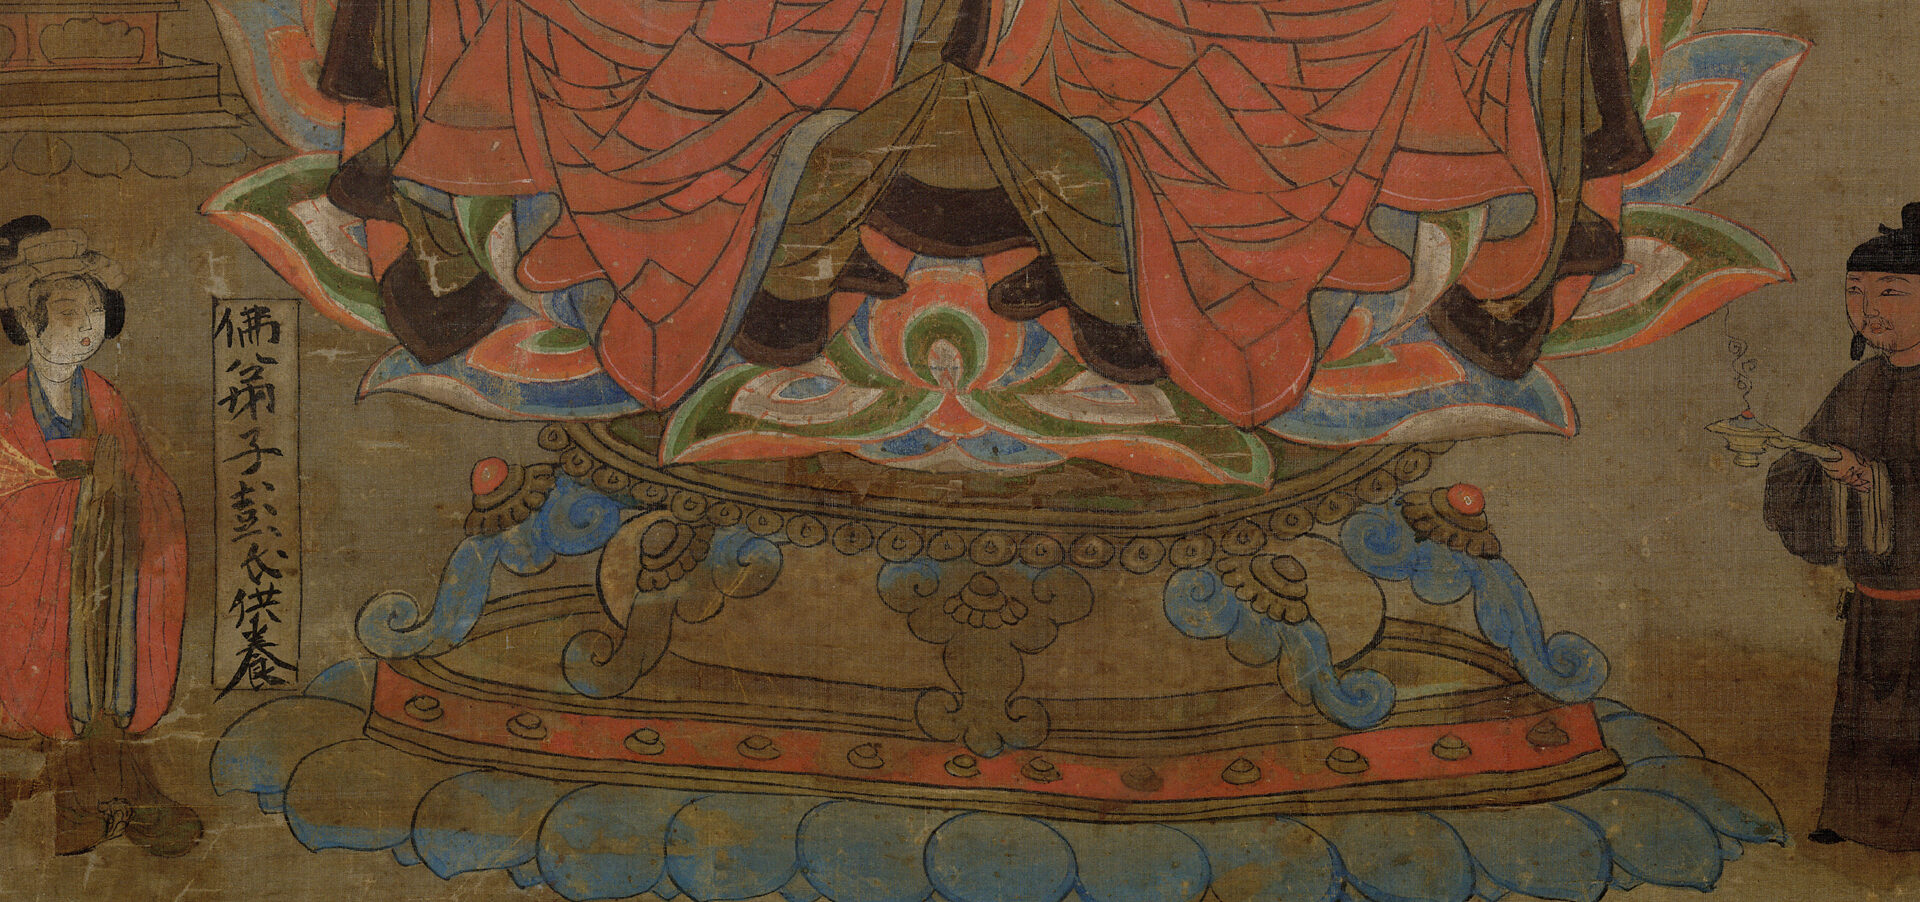 Painting of two donors at the foot of a Buddhist figure.